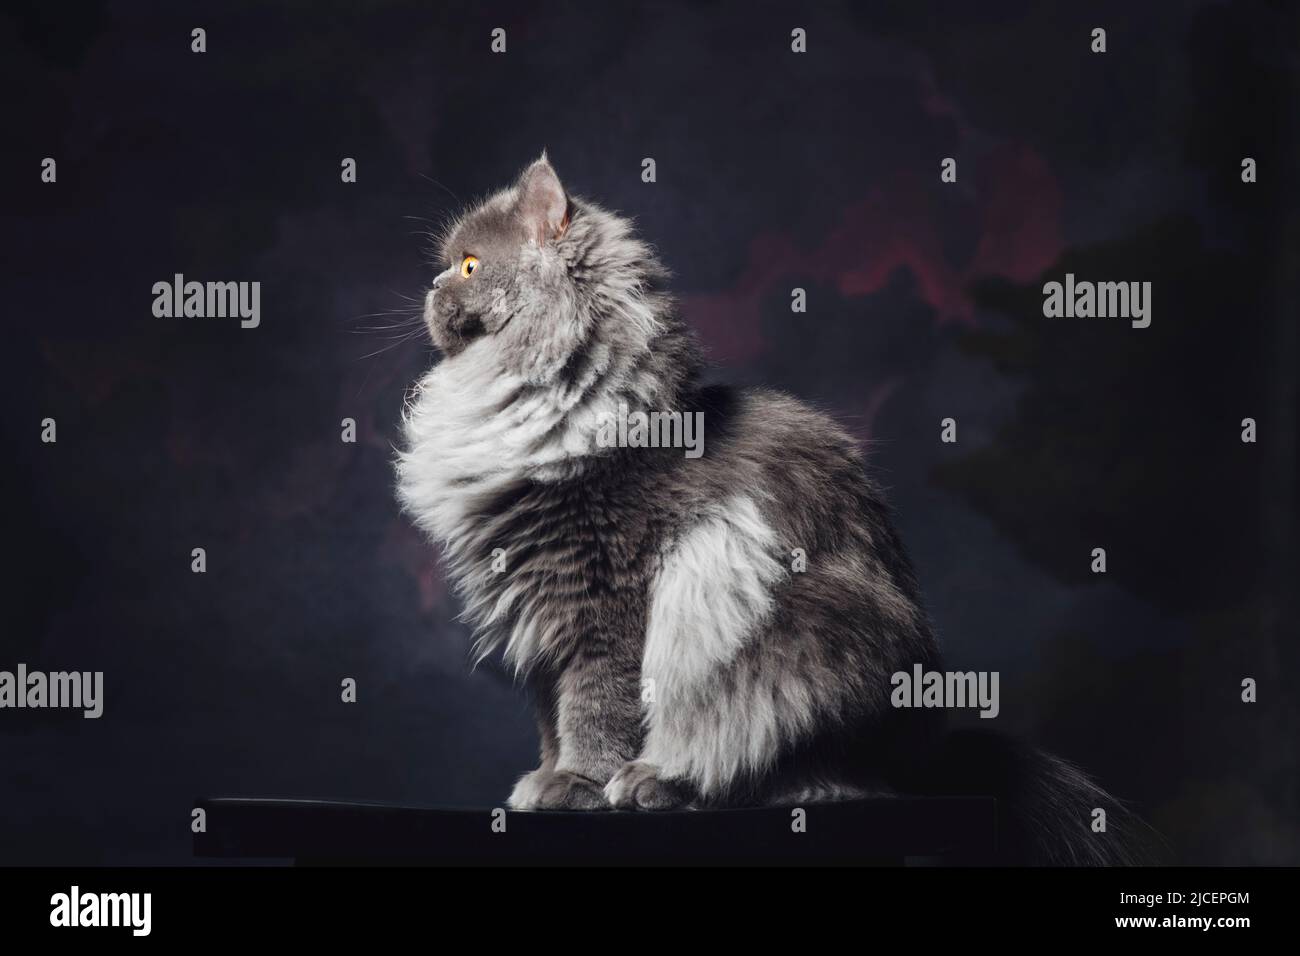 Profile portrait of a beautifuly fluffy grey and silver cat against a painted backdrop. Stock Photo